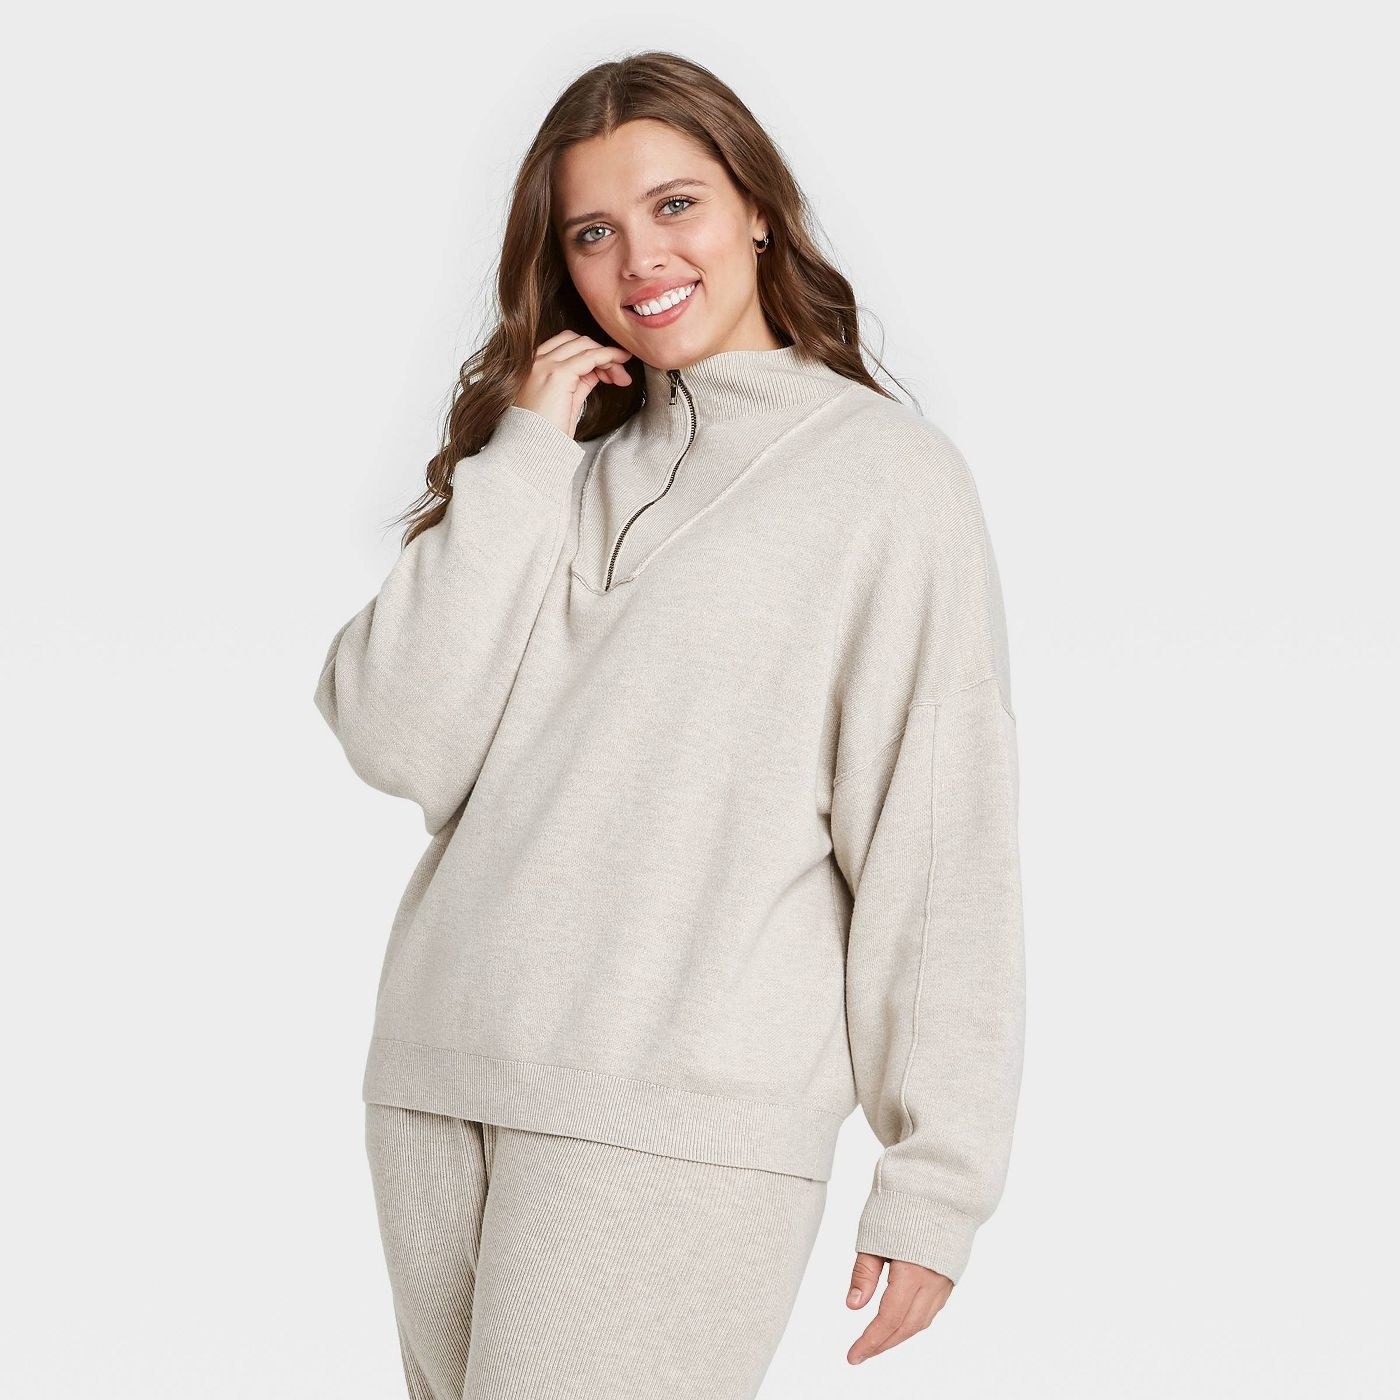 31 Cozy Pieces Of Loungewear From Target's Collection